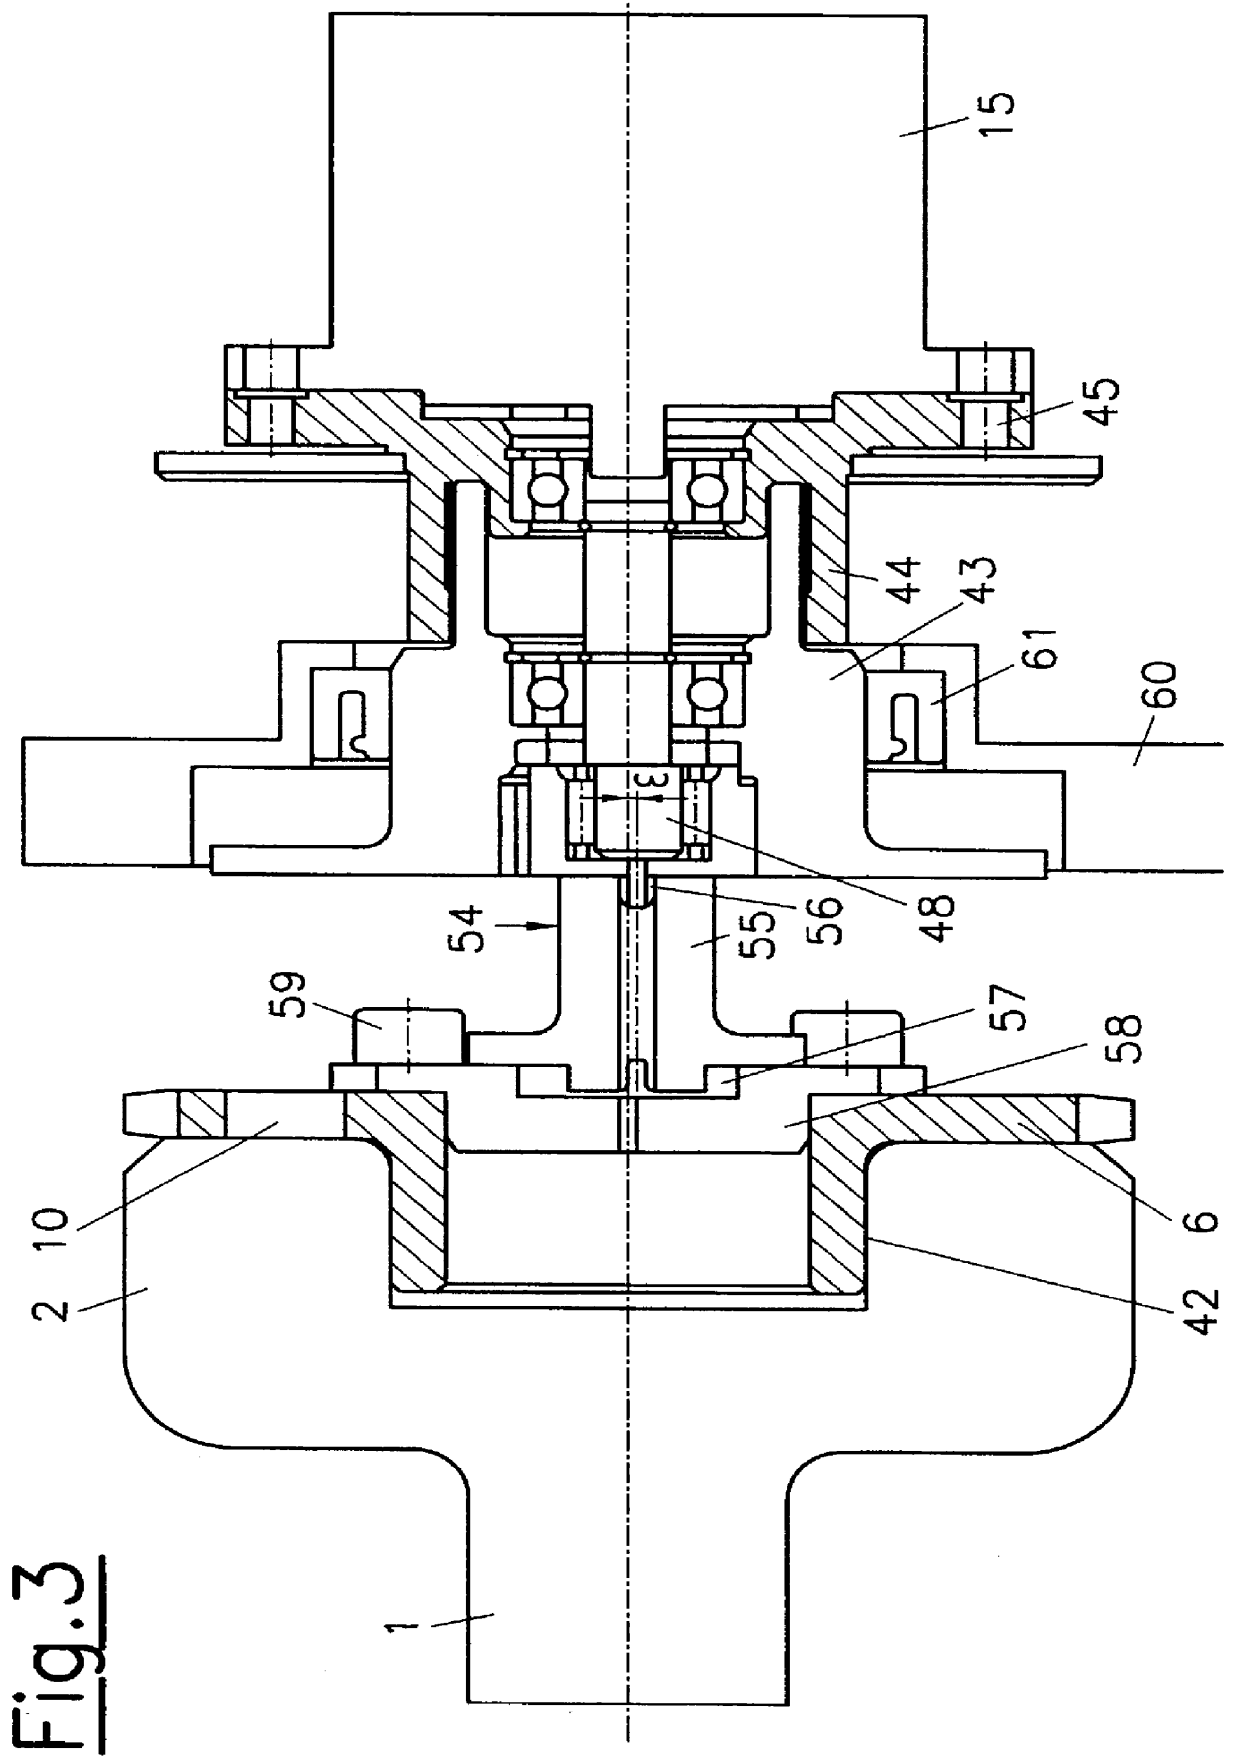 Device for adjusting the phase angle of a camshaft of an internal combustion engine